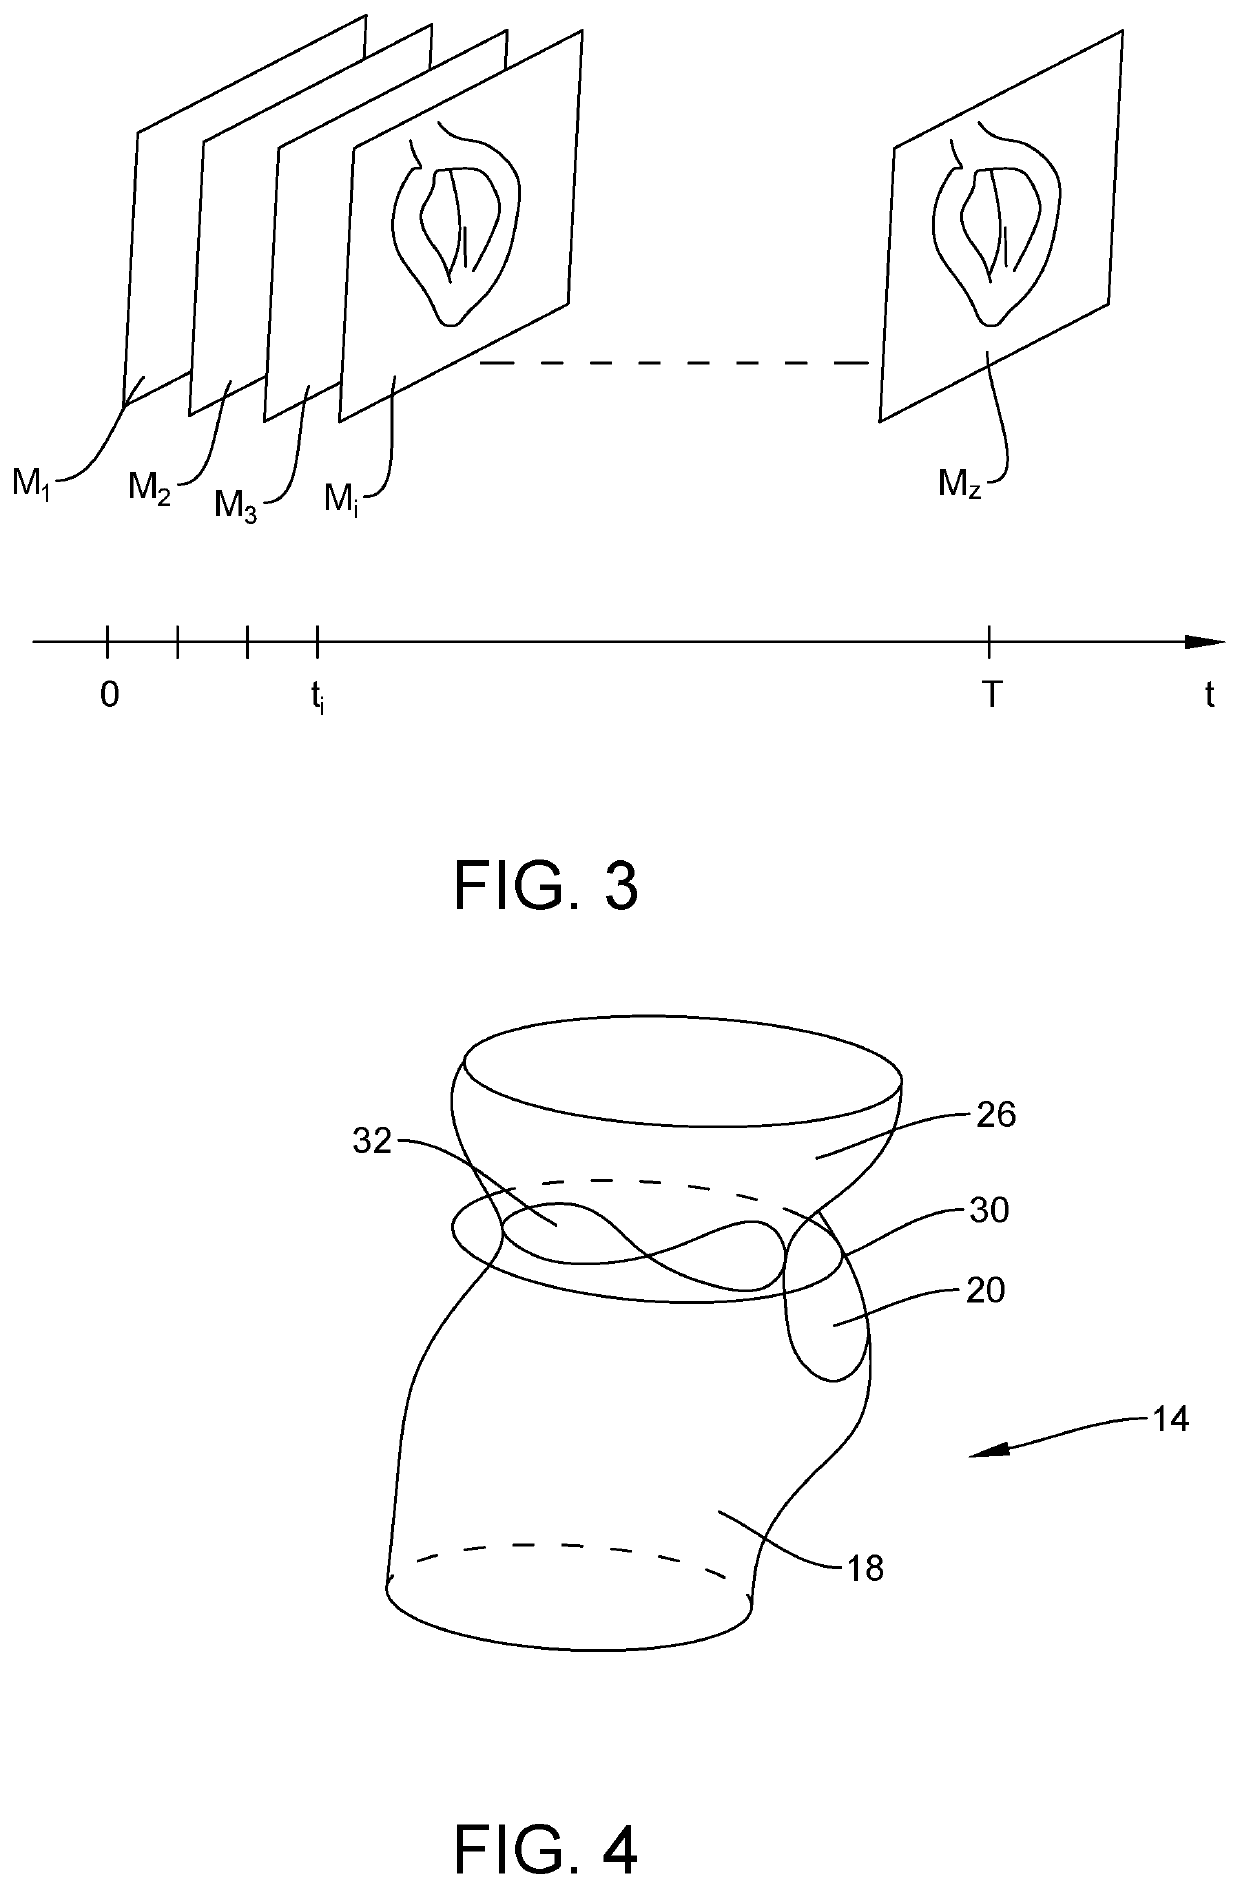 Method of visualizing a dynamic anatomical structure